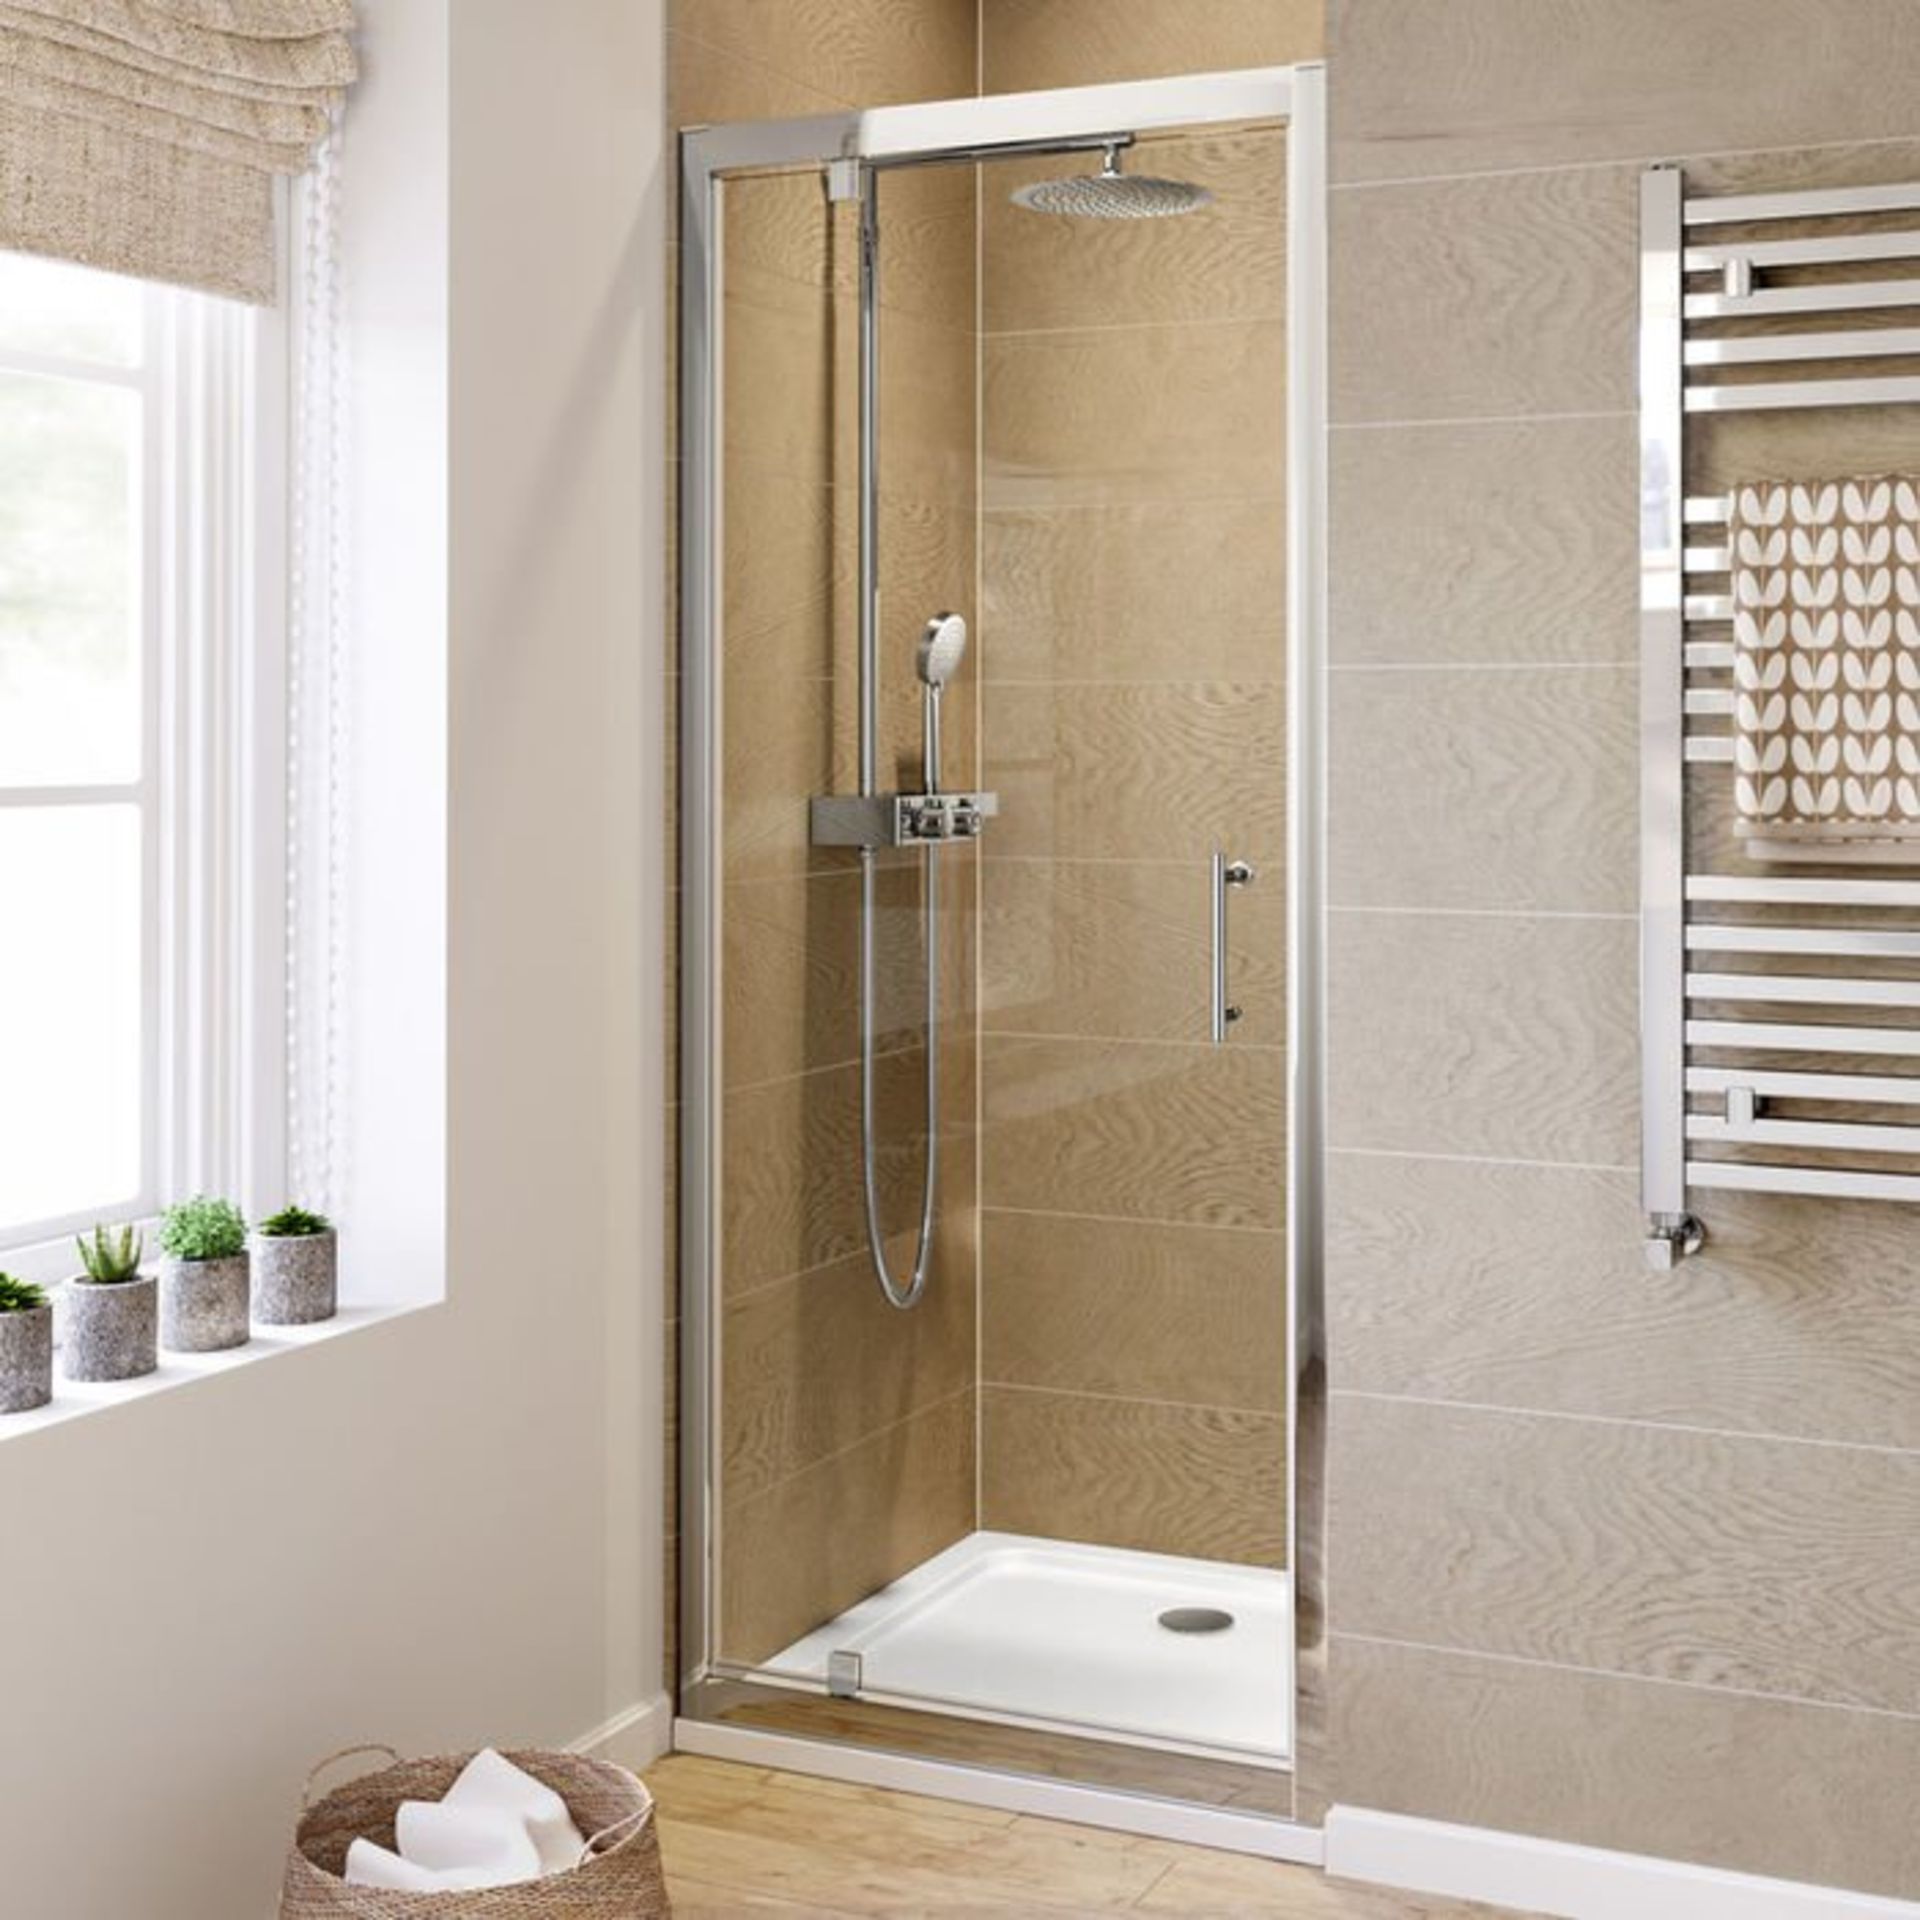 (A22) 900mm - 6mm - Elements Pivot Shower Door RRP £299.99 6mm Safety Glass Fully waterproof - Image 2 of 3